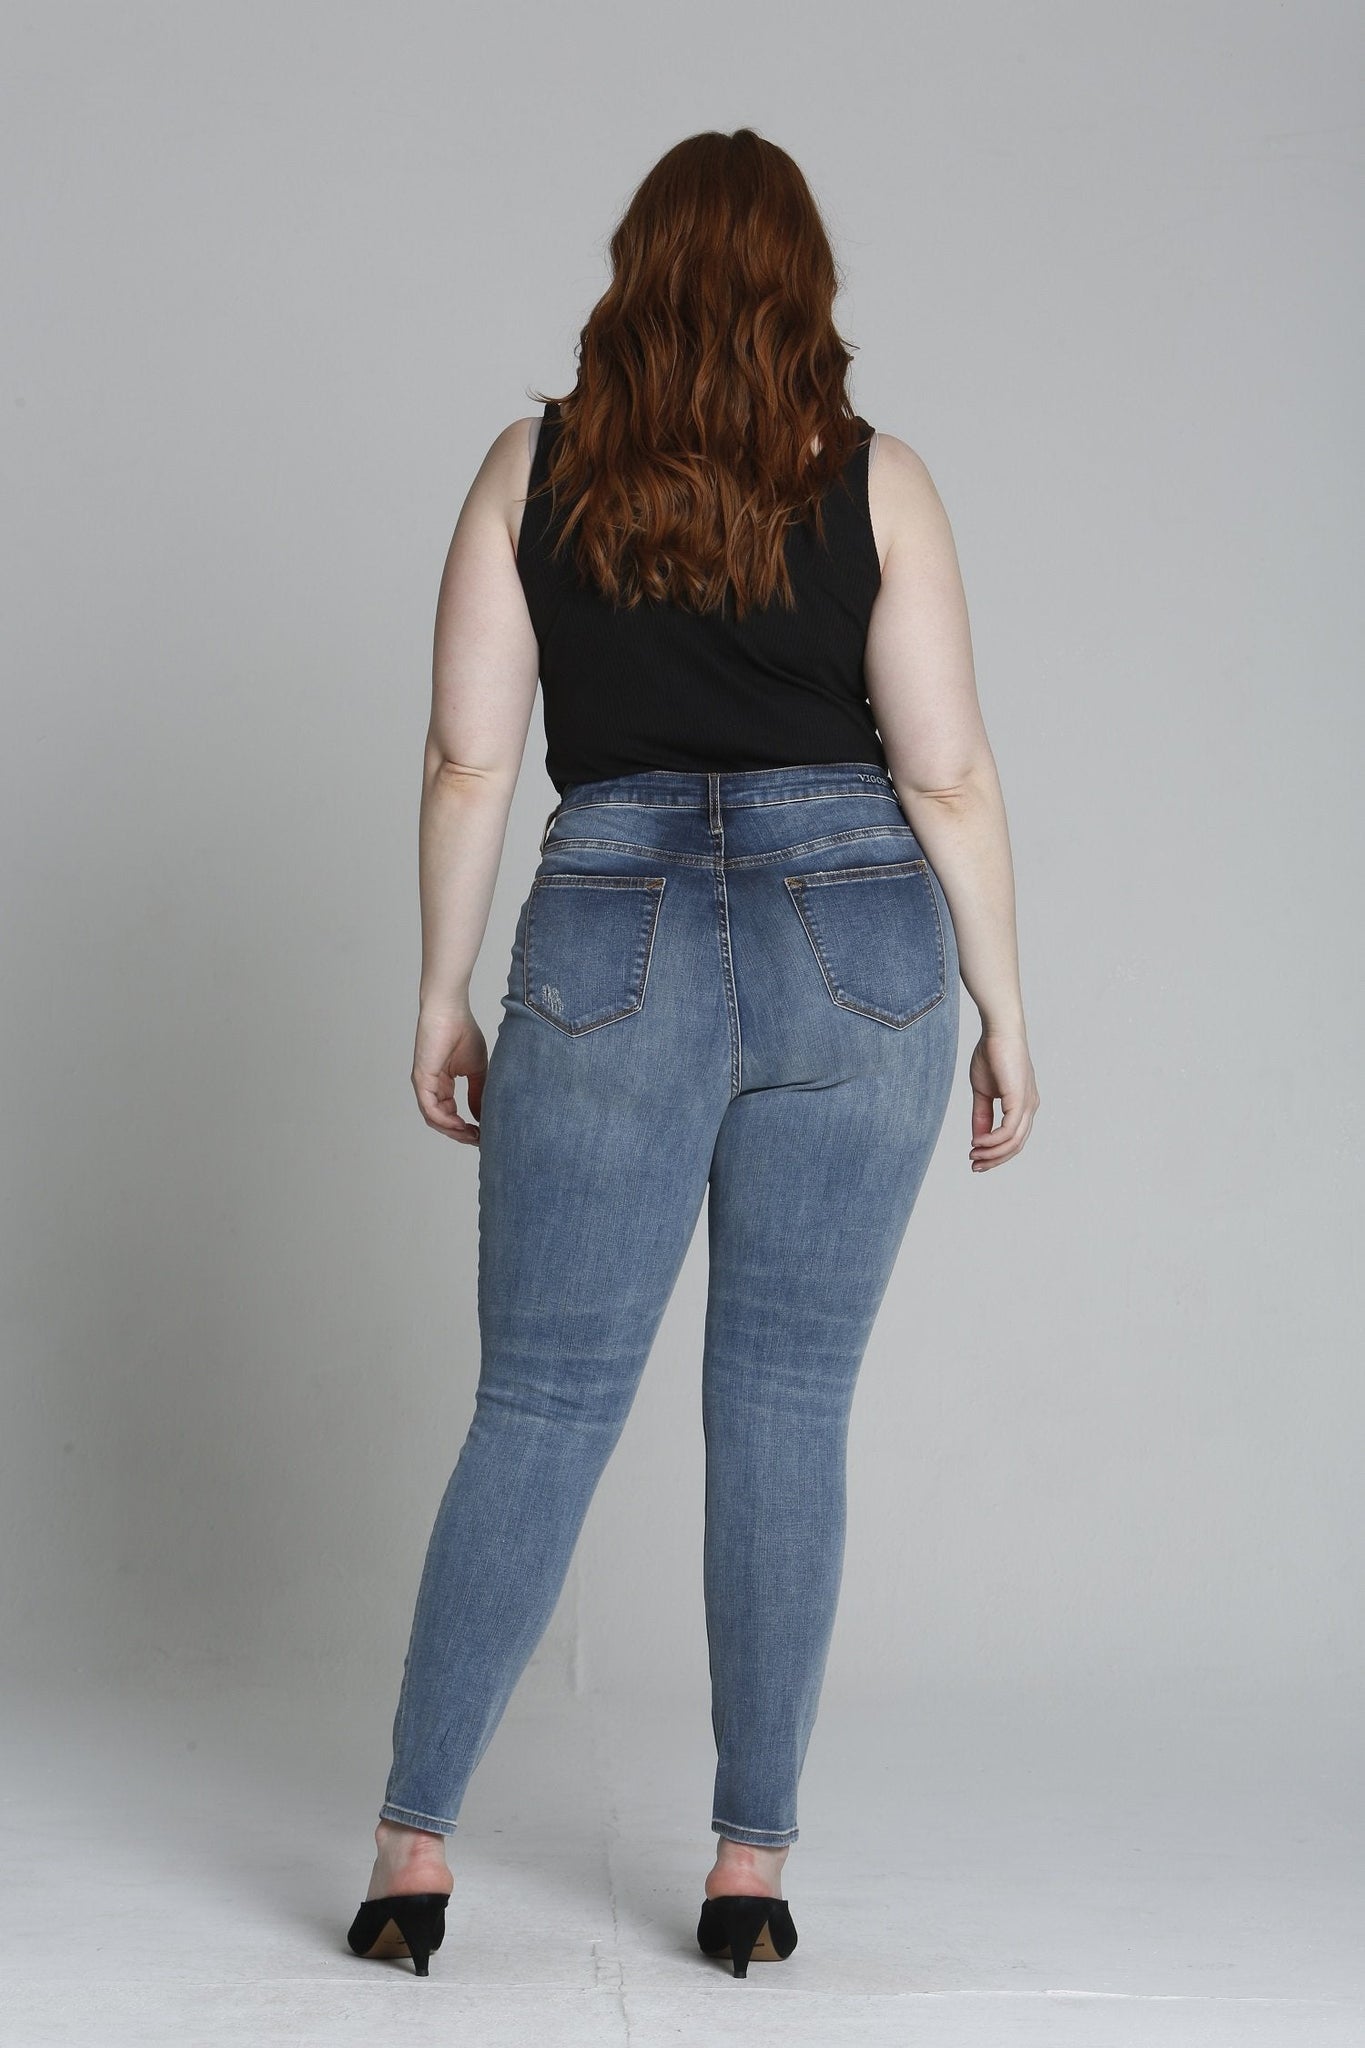 Load image into Gallery viewer, Jagger Super Skinny [Plus Size] - Dark
